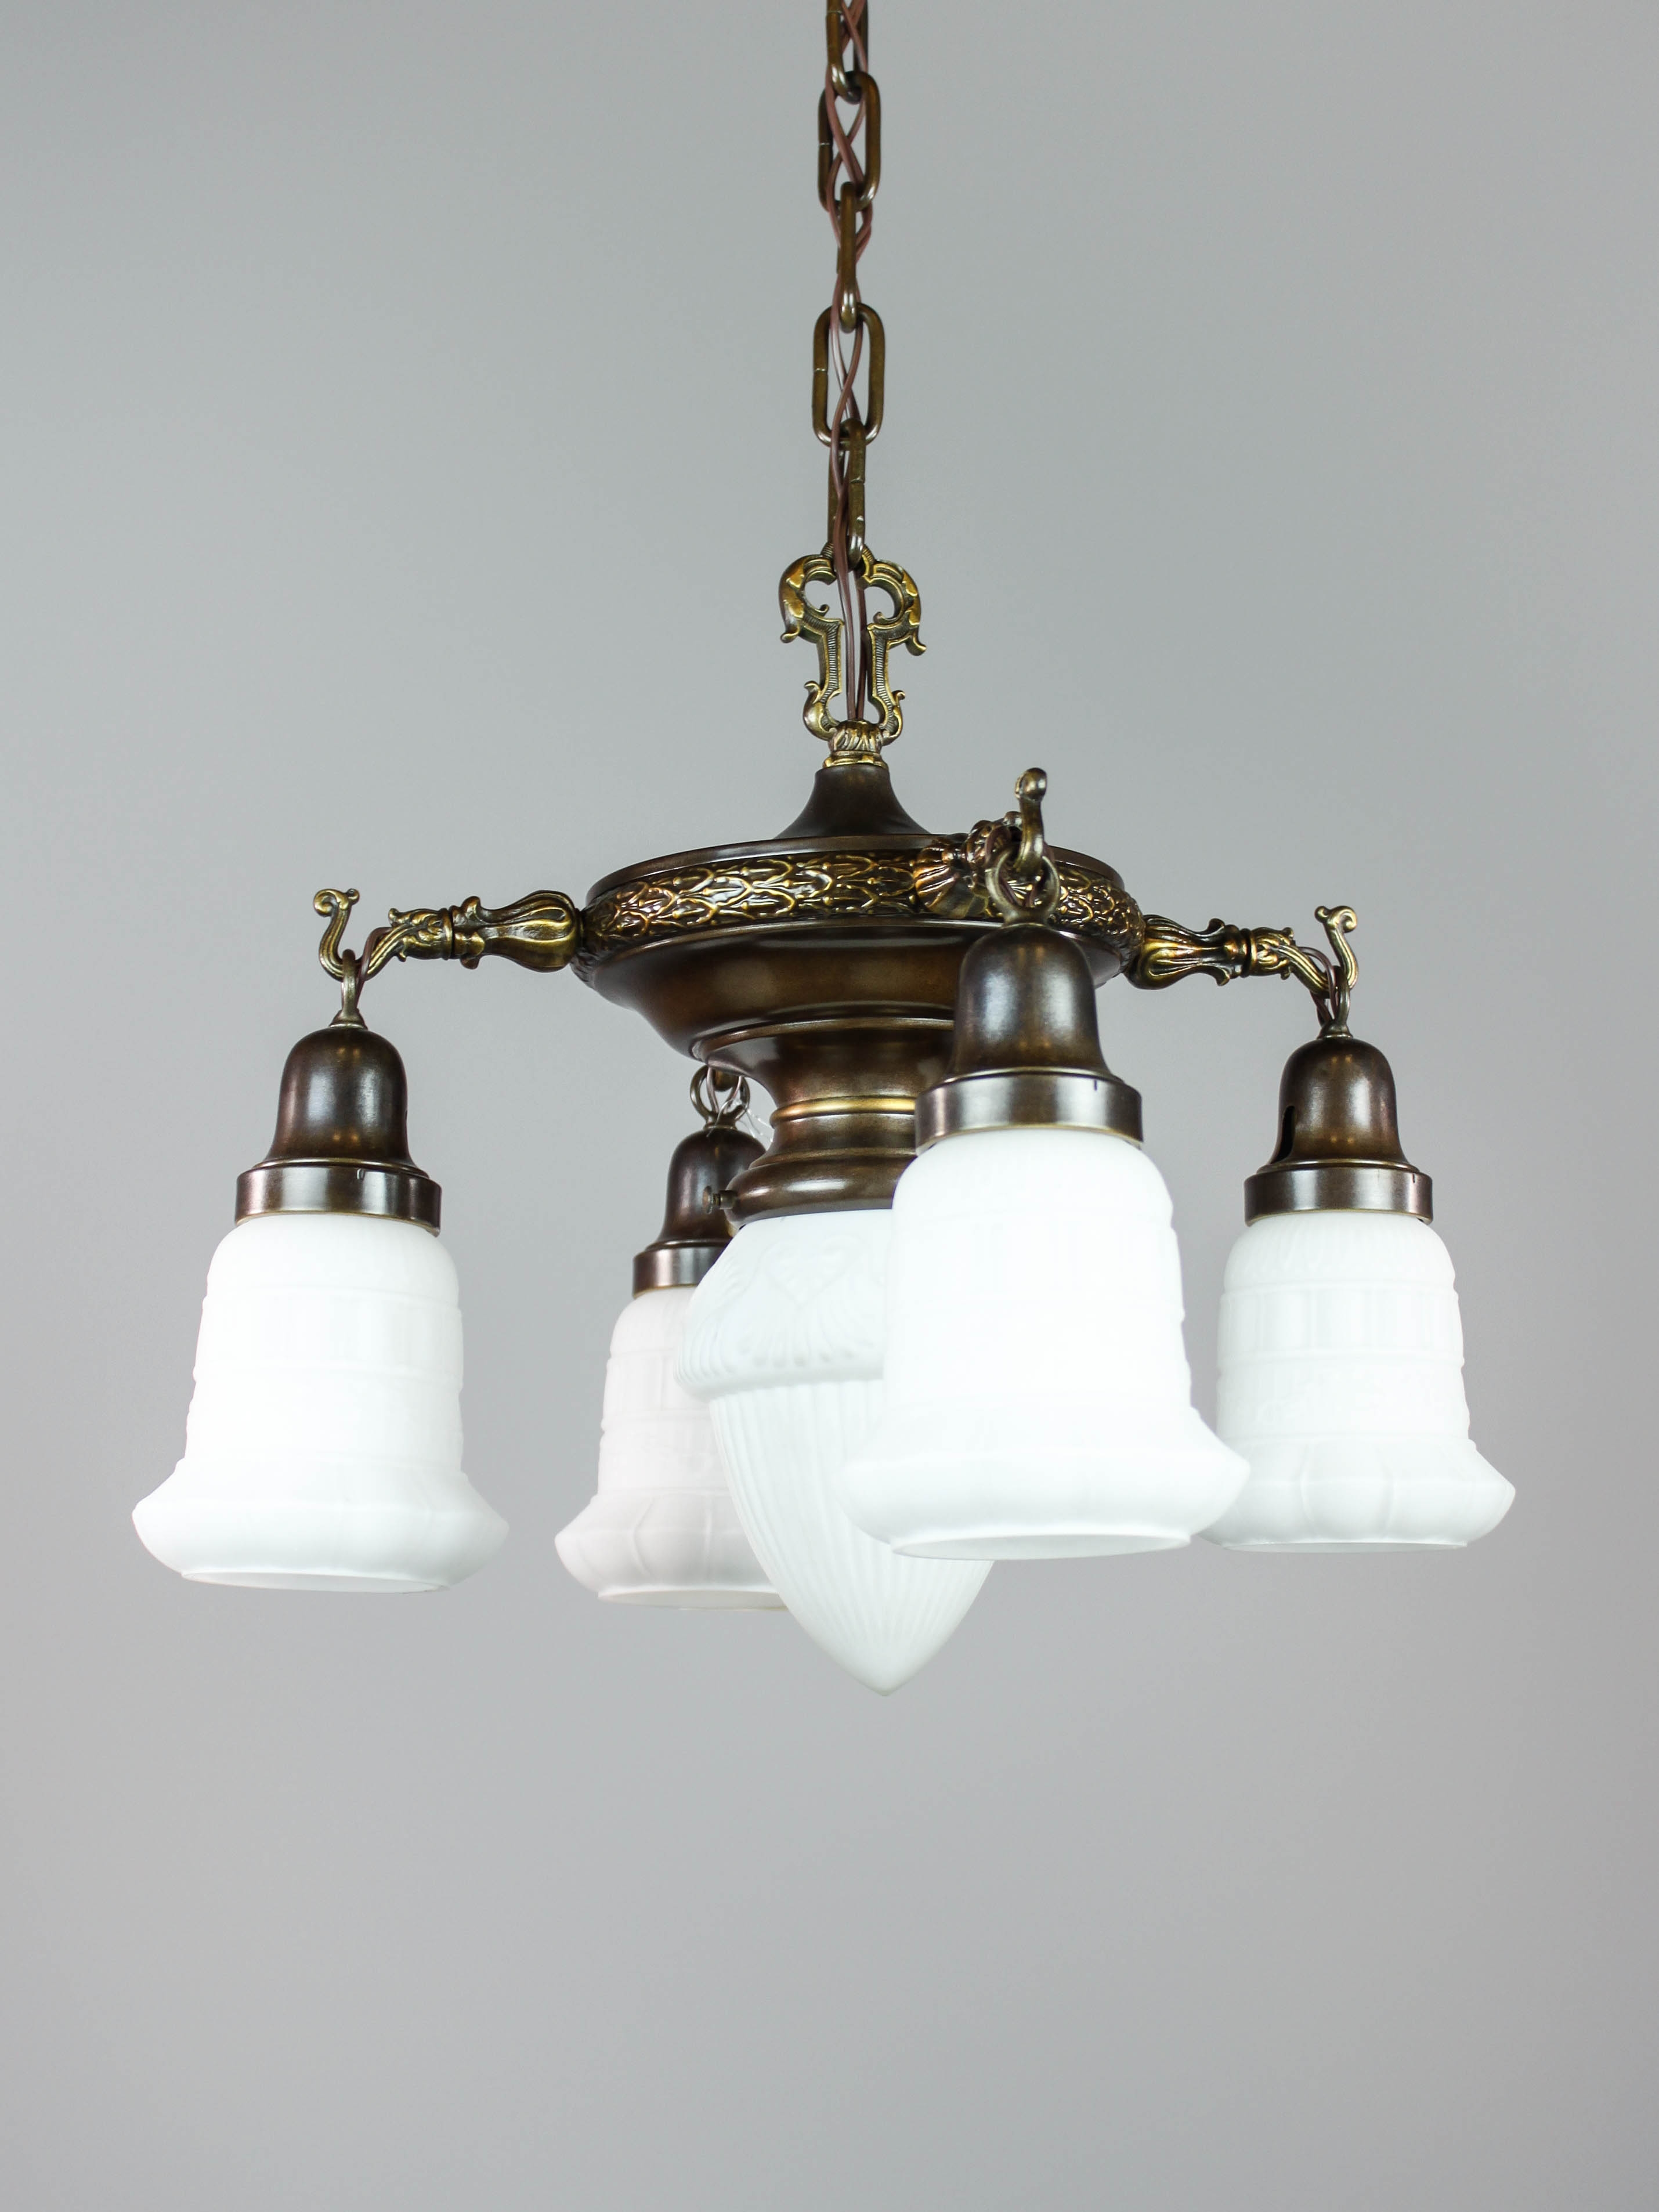 Colonial Revival Ceiling Lights